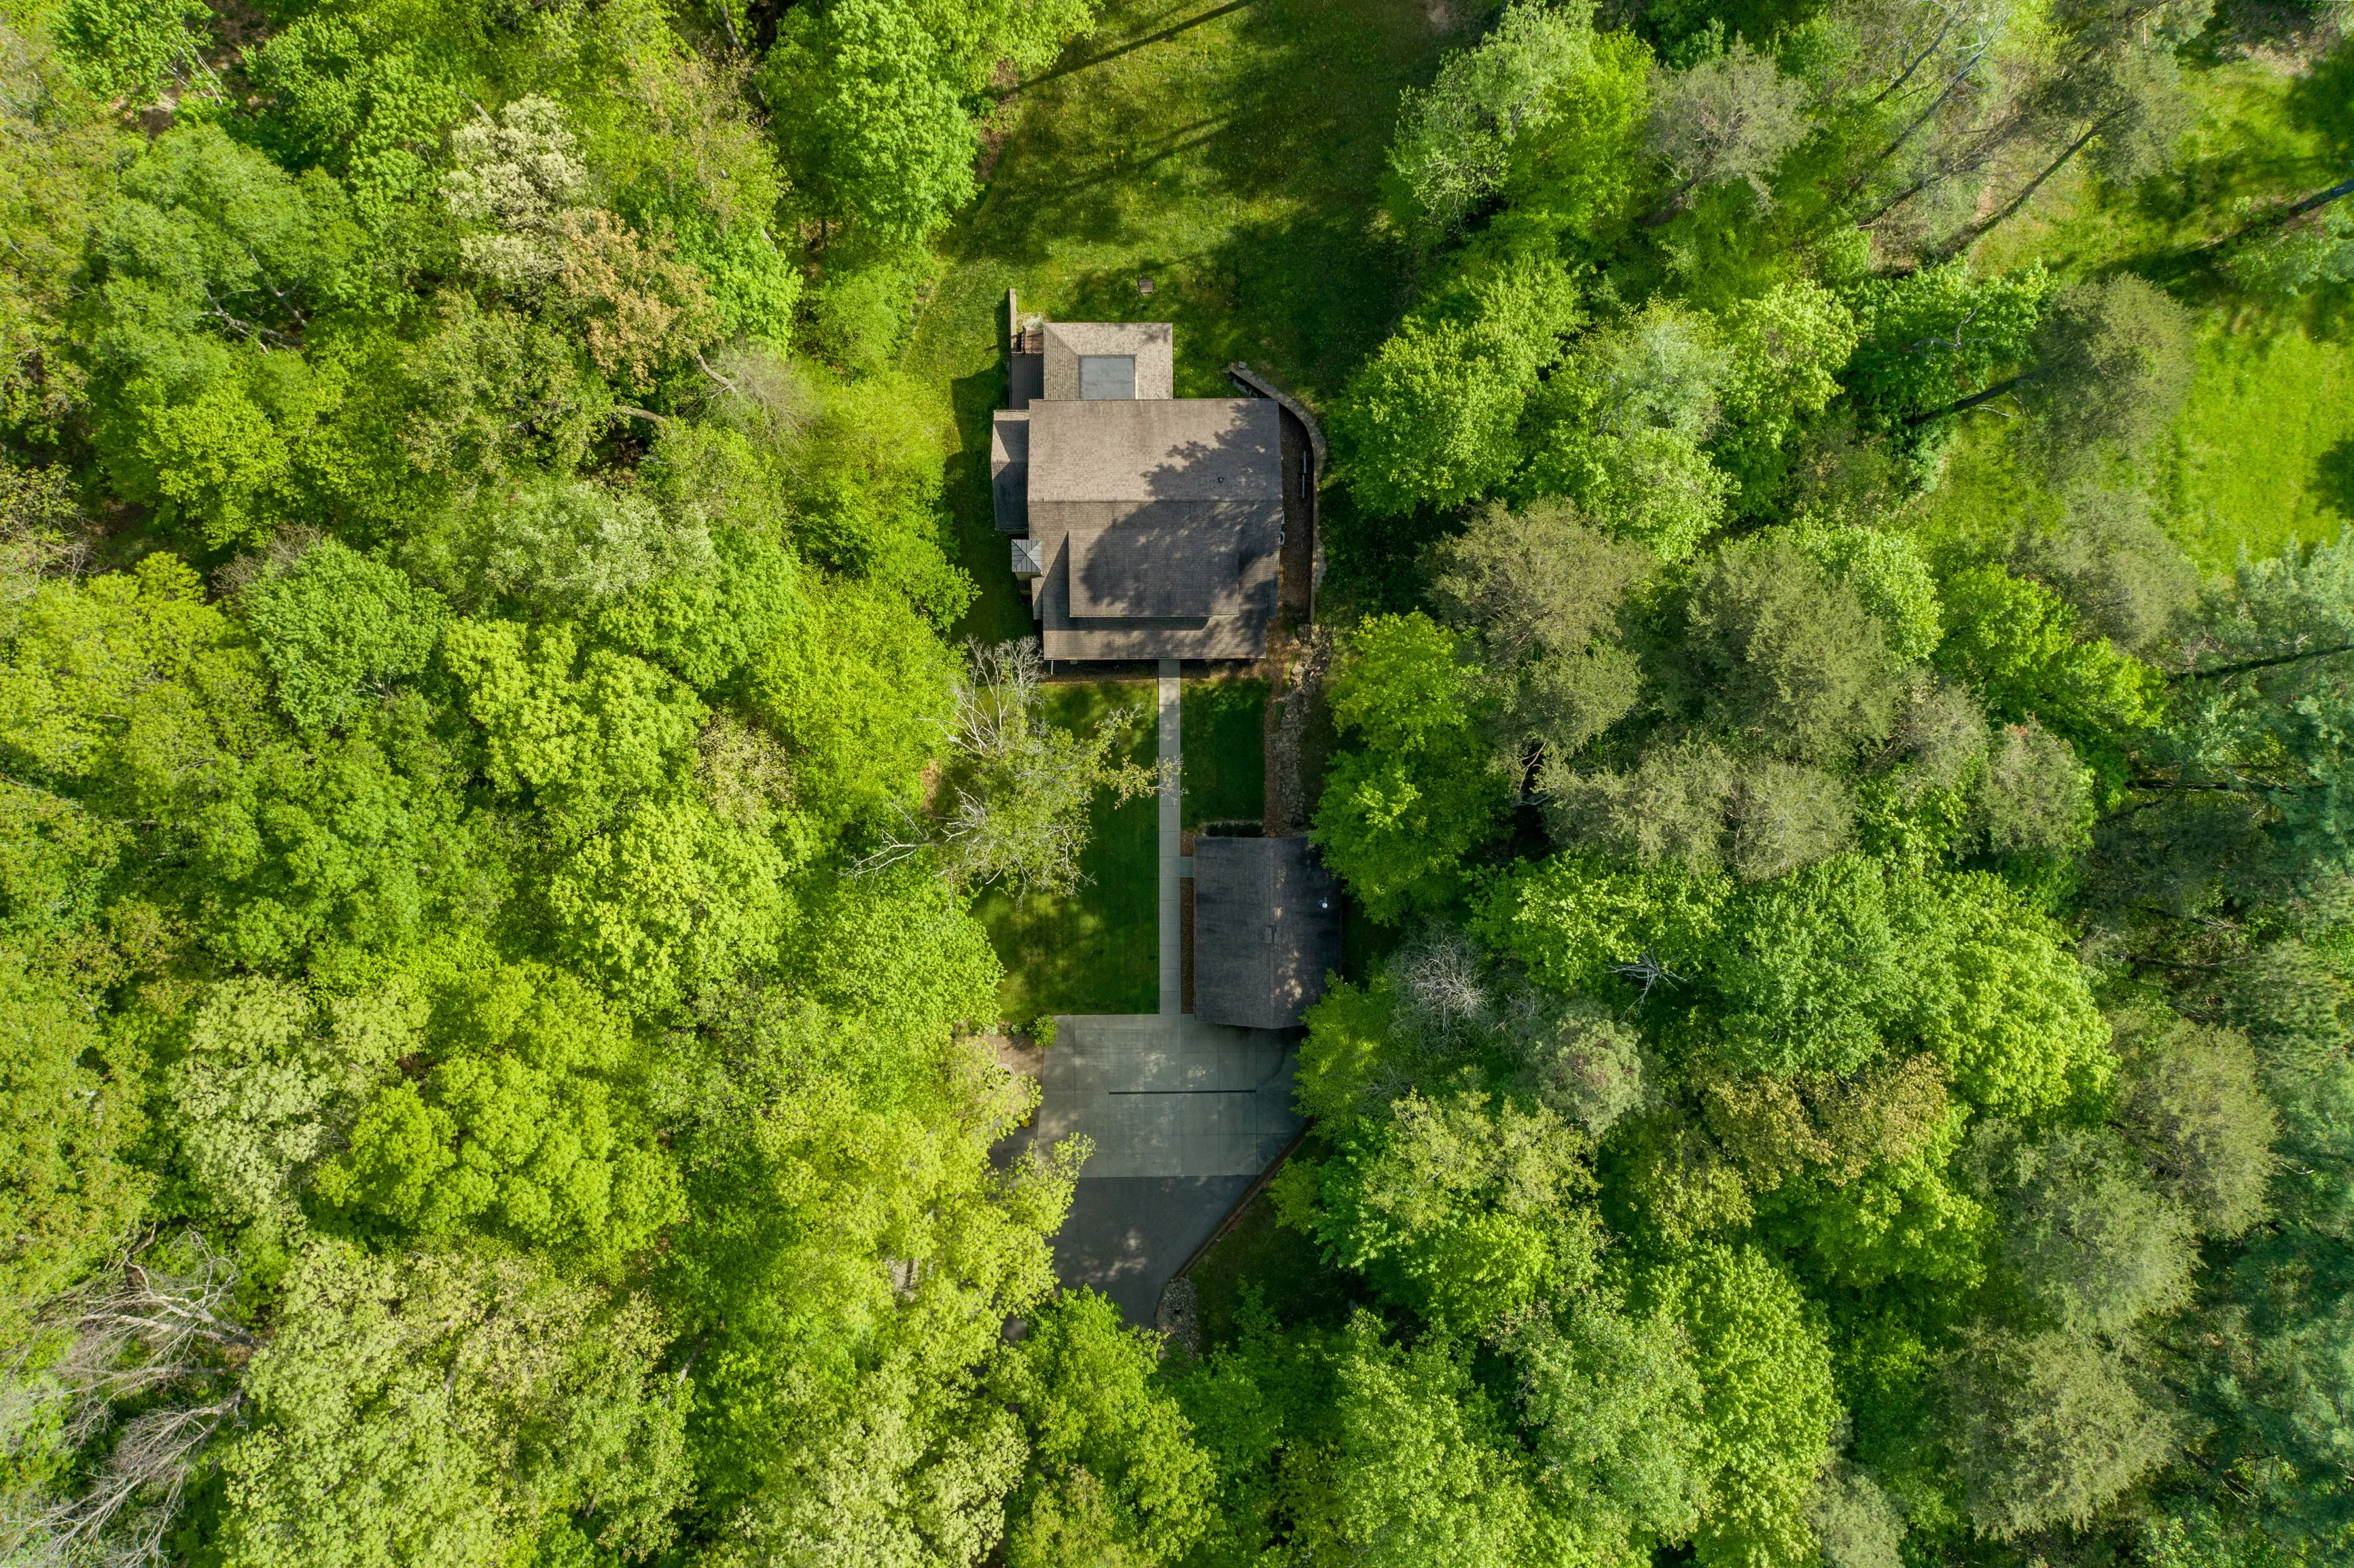 Aerial view of a house surrounded by dense green trees with a clear path leading up to the house.